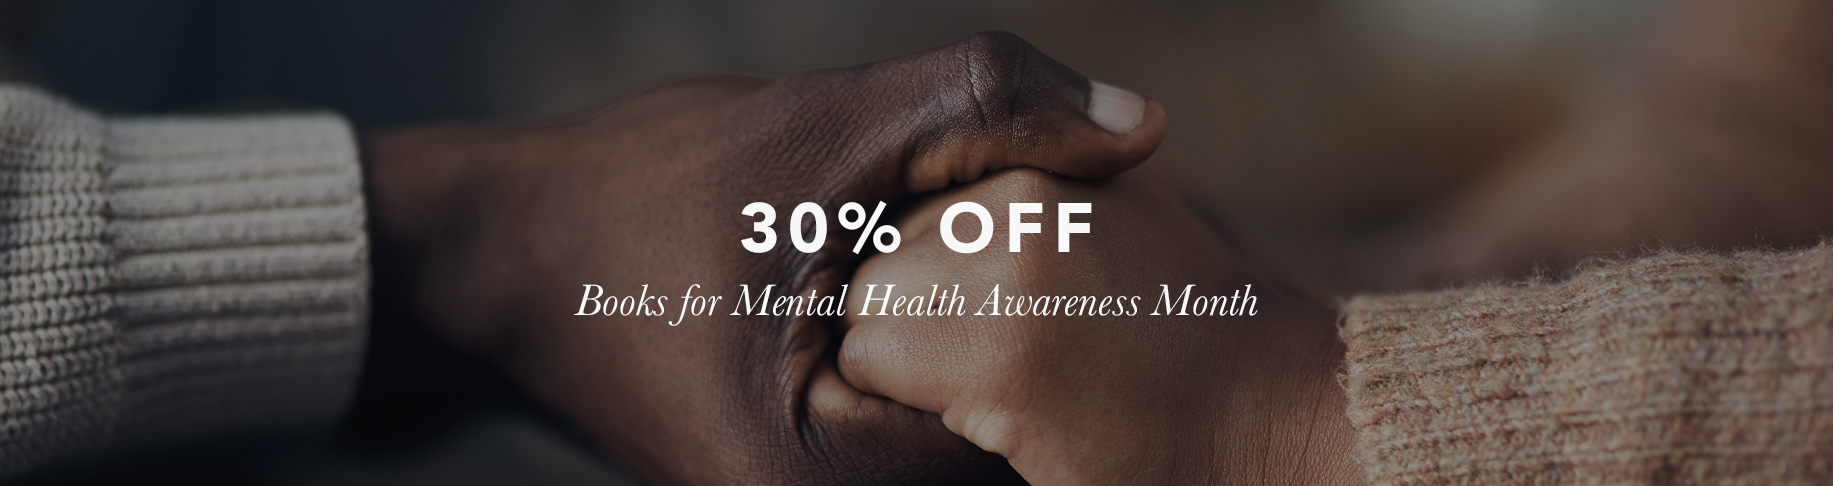 30% Off Books for Mental Health Awareness Month